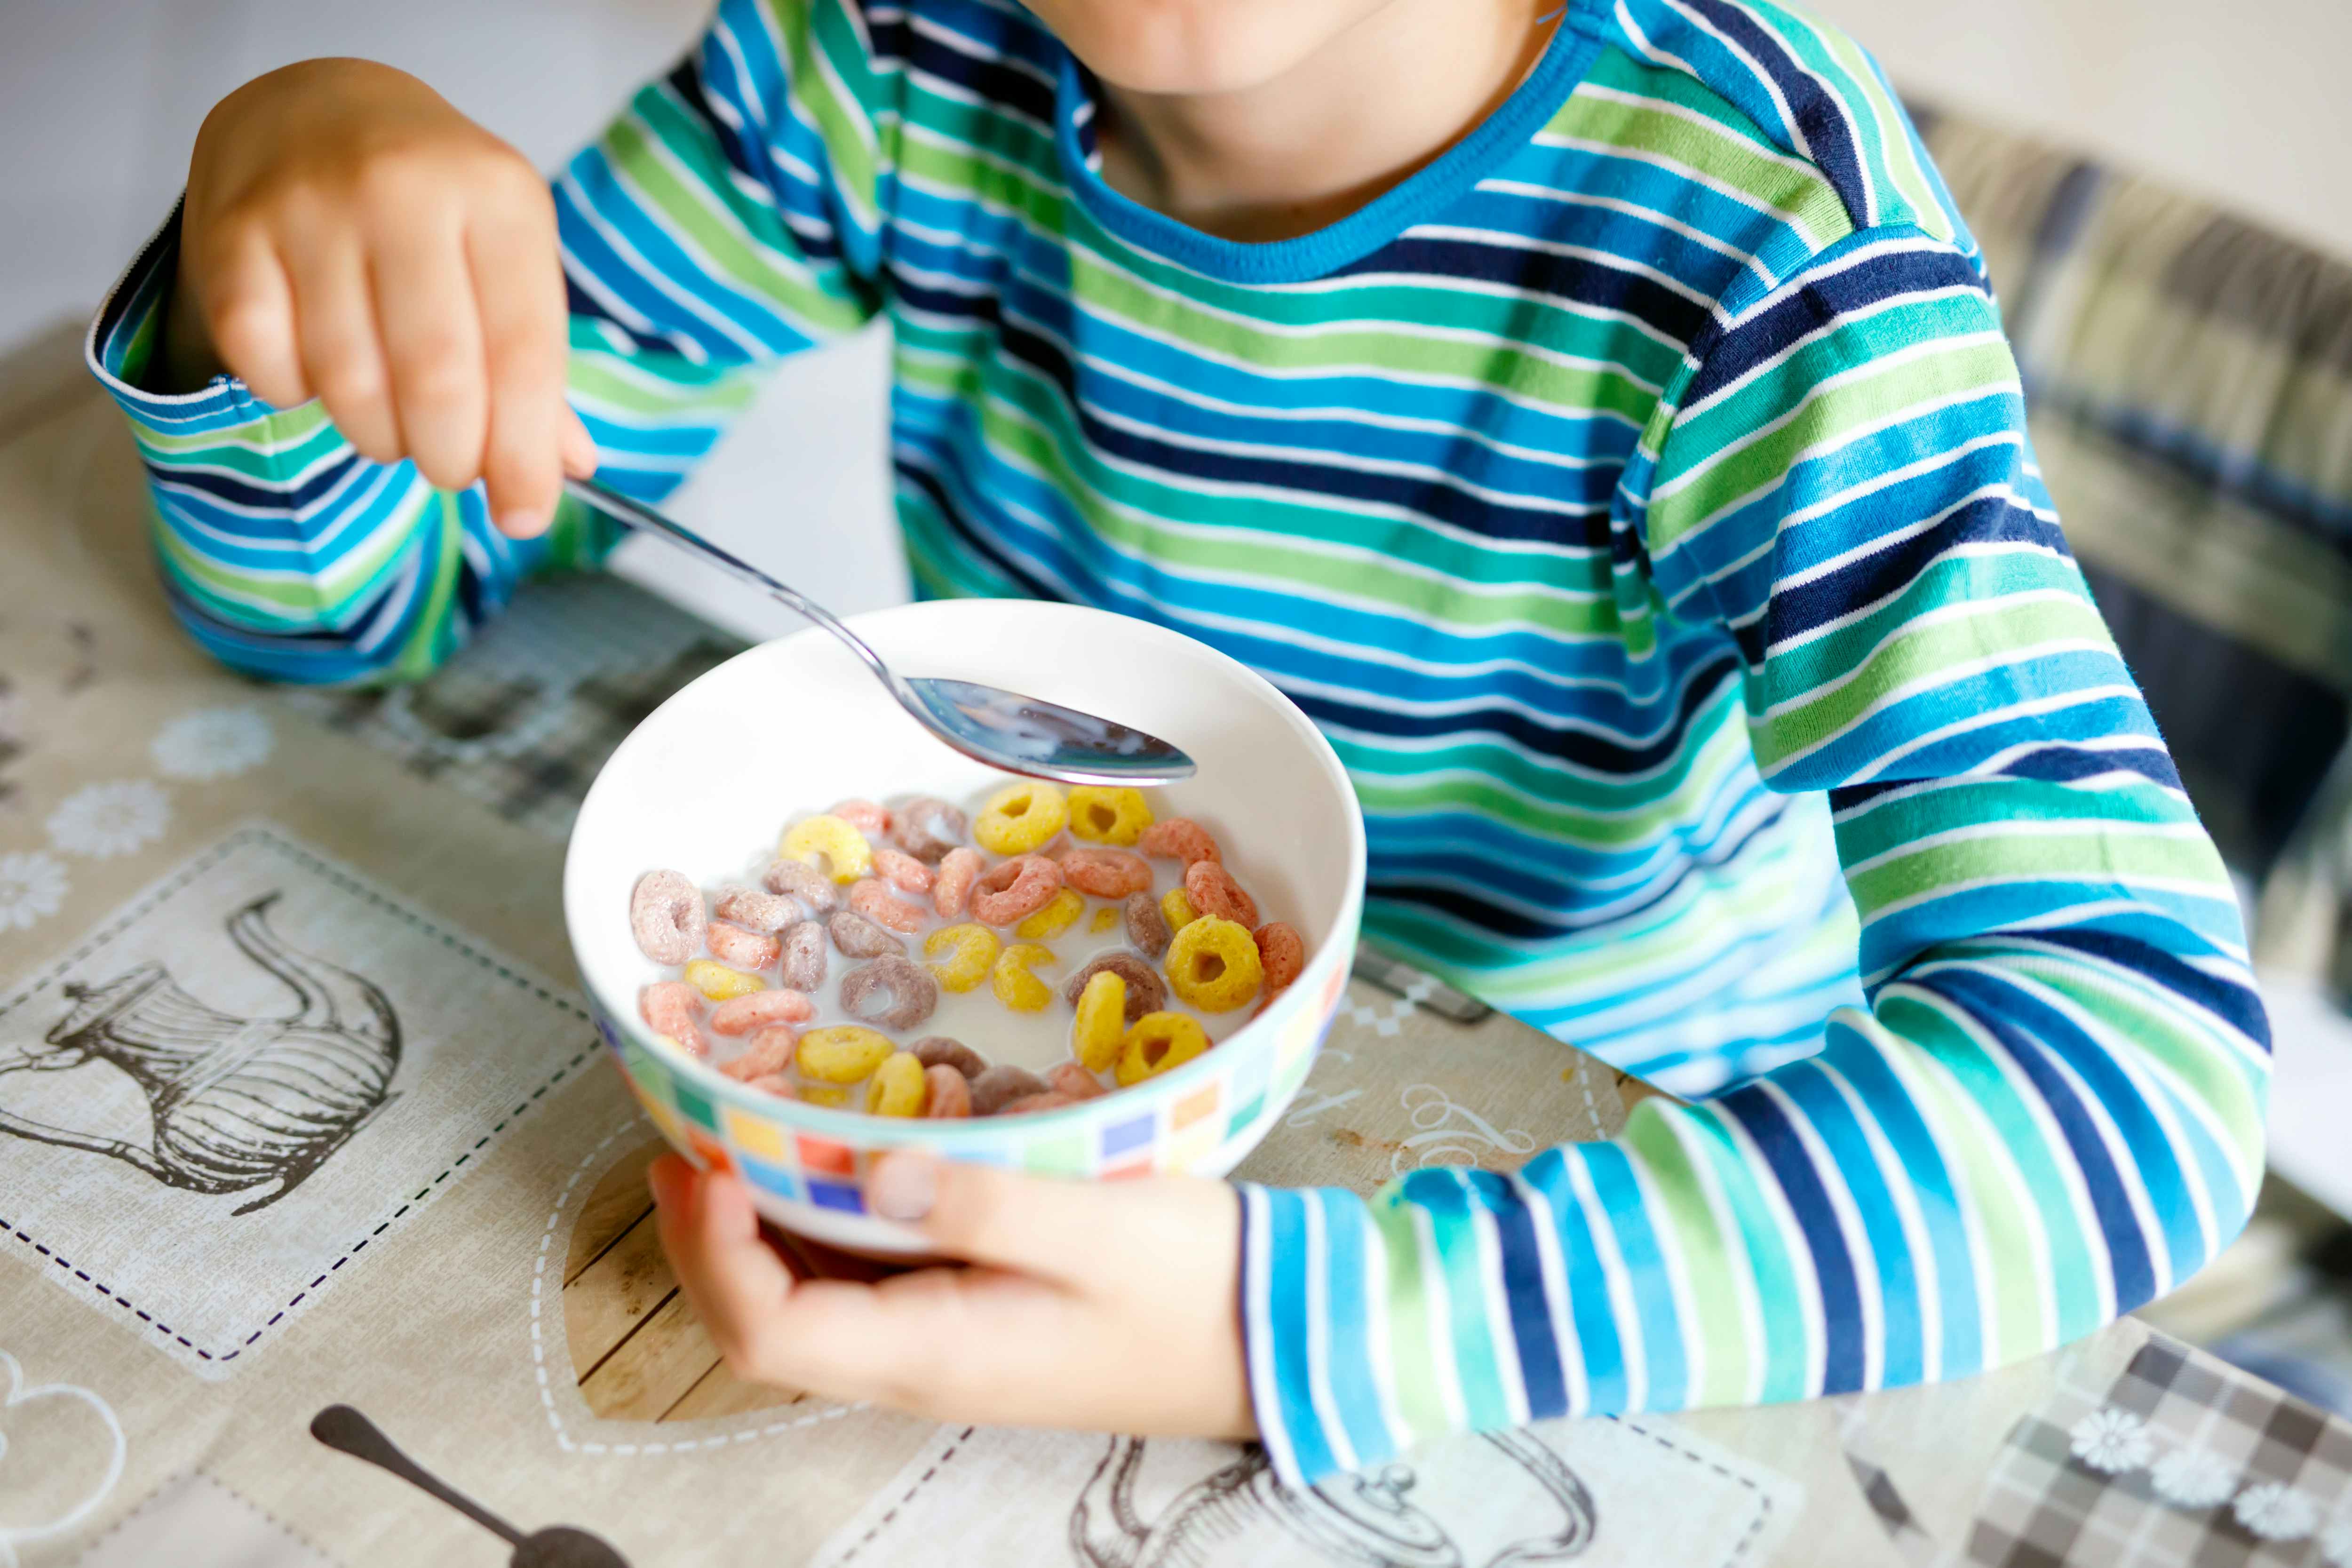 Boy eating bowl full of cereal. 